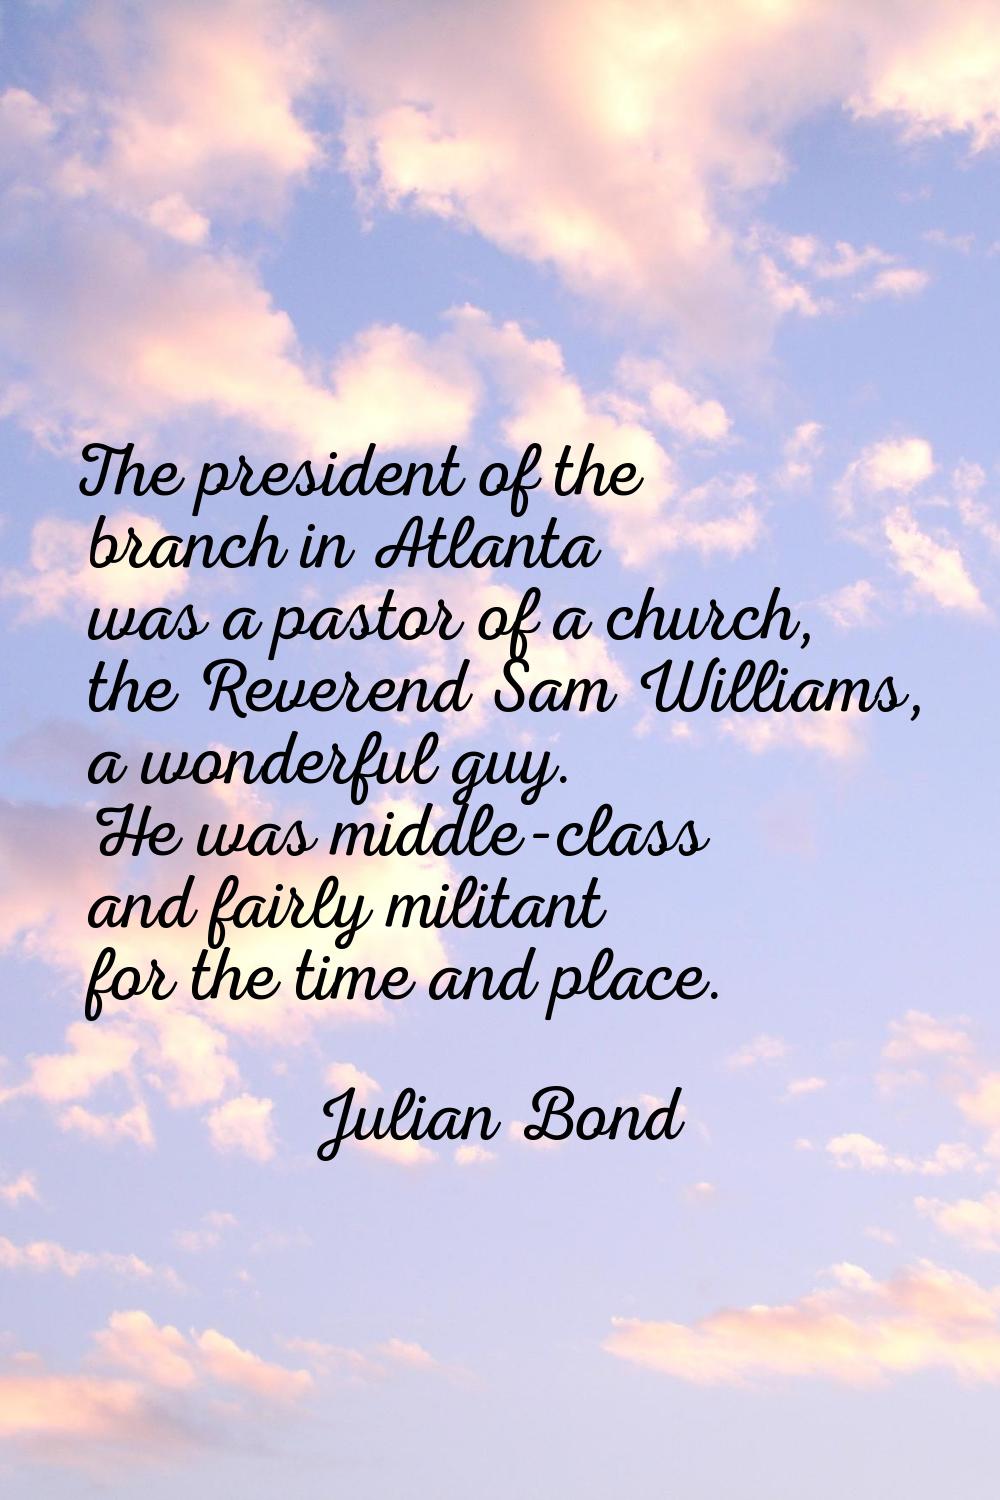 The president of the branch in Atlanta was a pastor of a church, the Reverend Sam Williams, a wonde